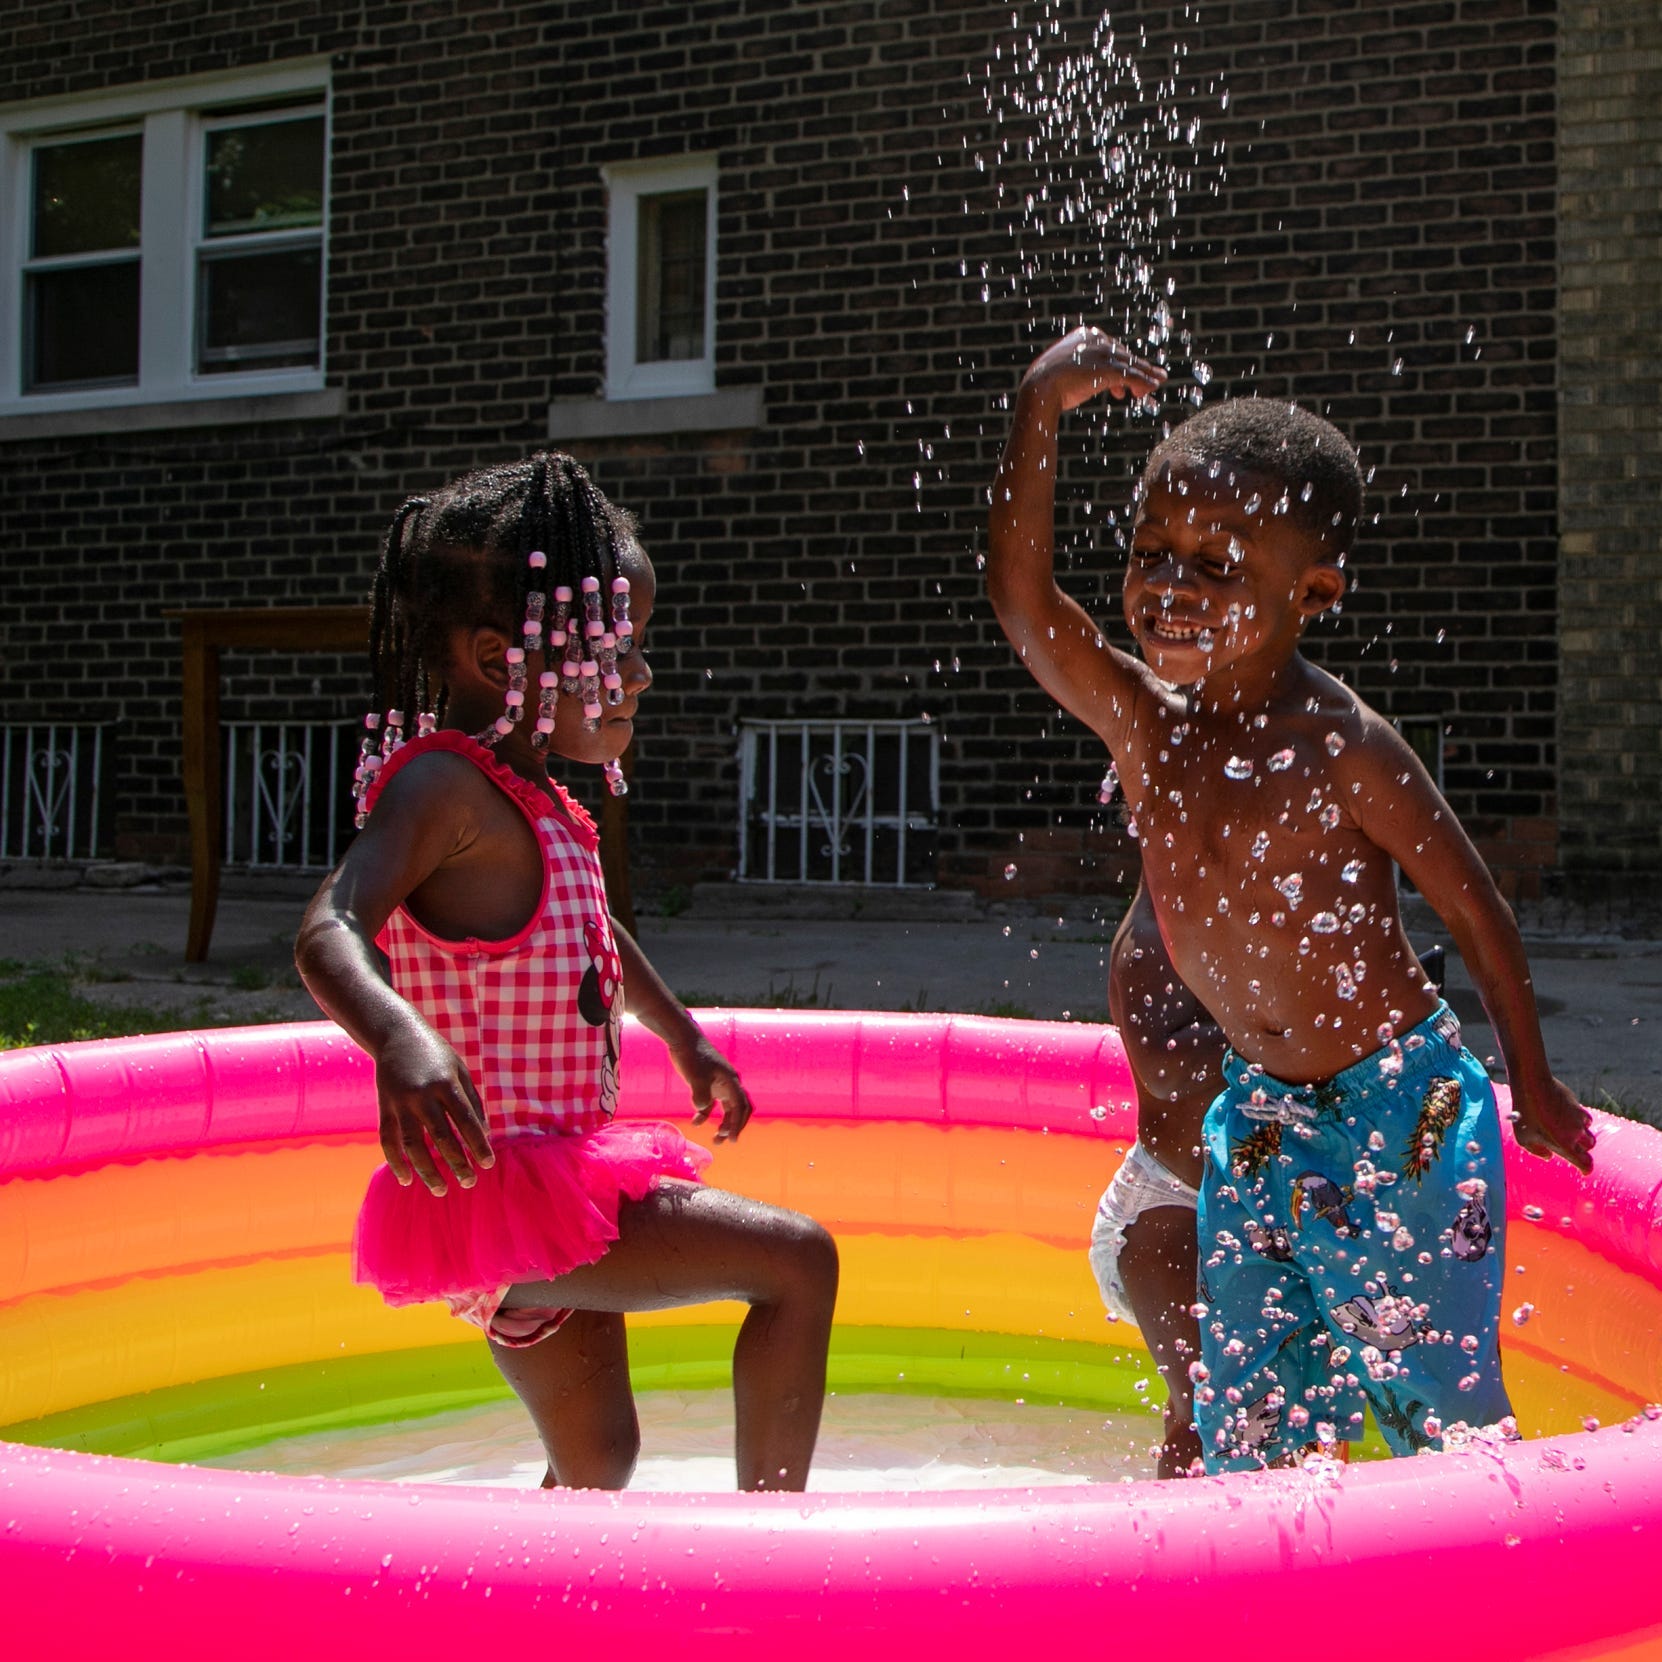 Myiah Marray, 3, left, of Detroit, plays in a tiny pool with her brother Kari Marray, 4, on July 7, 2020, in an attempt to stay cool during a heat advisory.